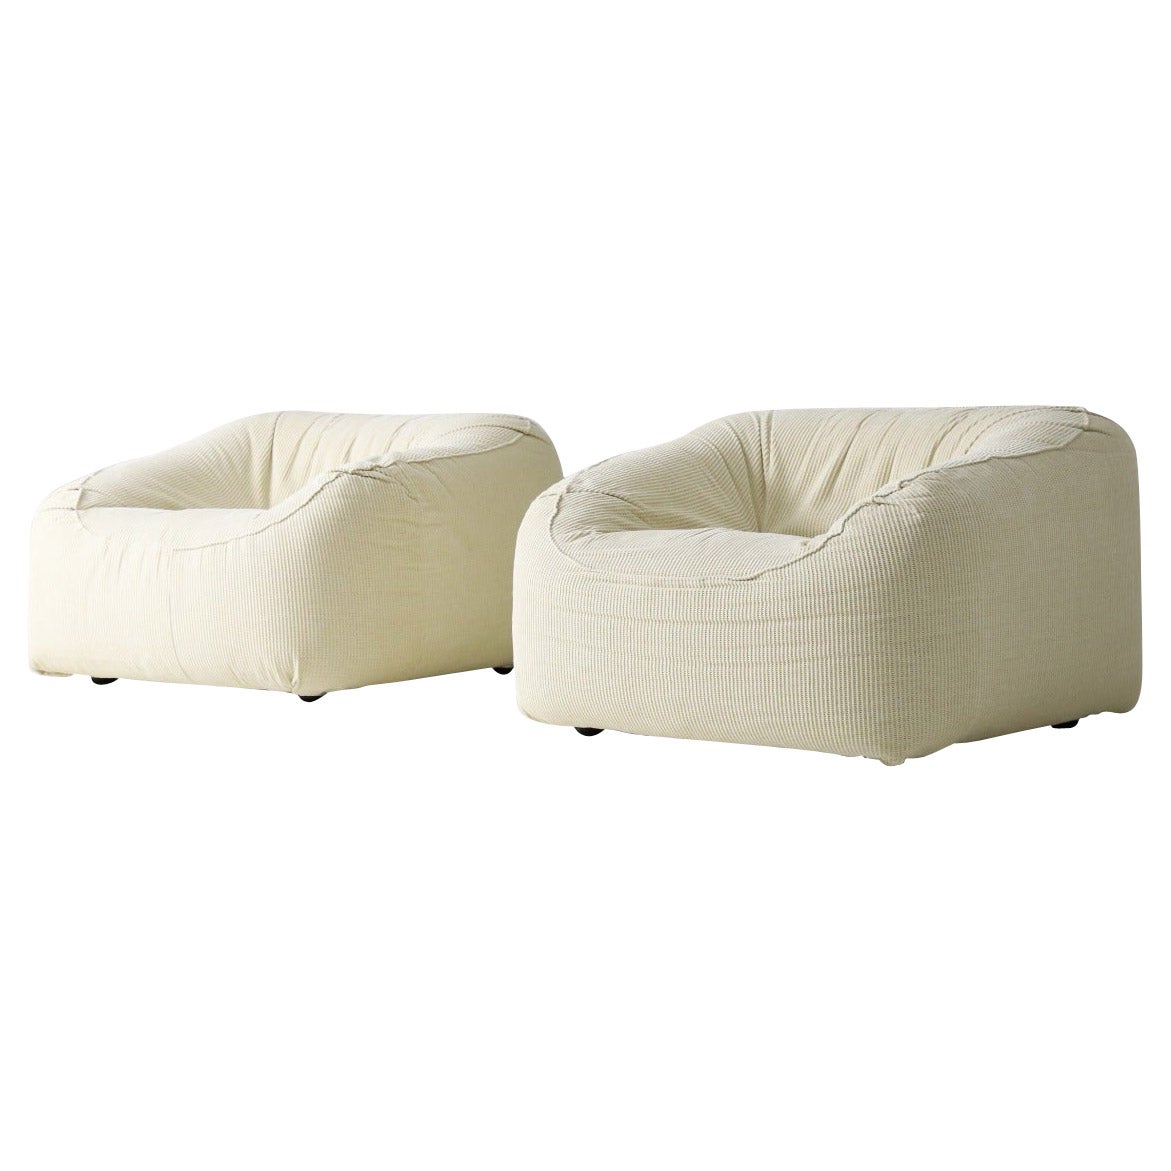 Pair of Oversized Italian Lounge Chairs, 1970s For Sale